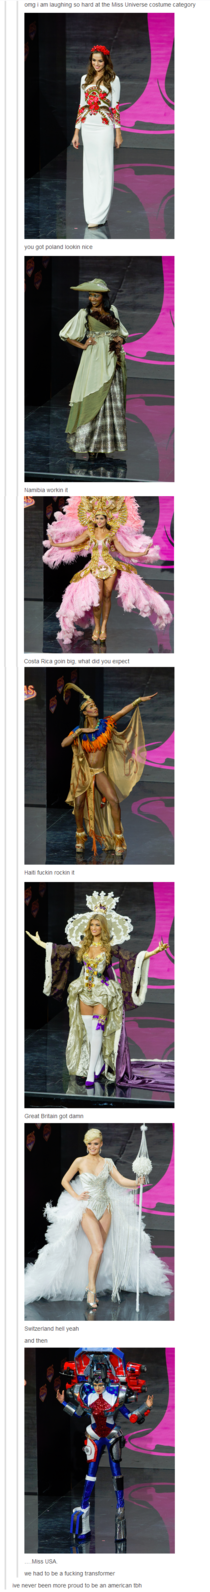 The Sheer Variety of Miss Universe Costumes